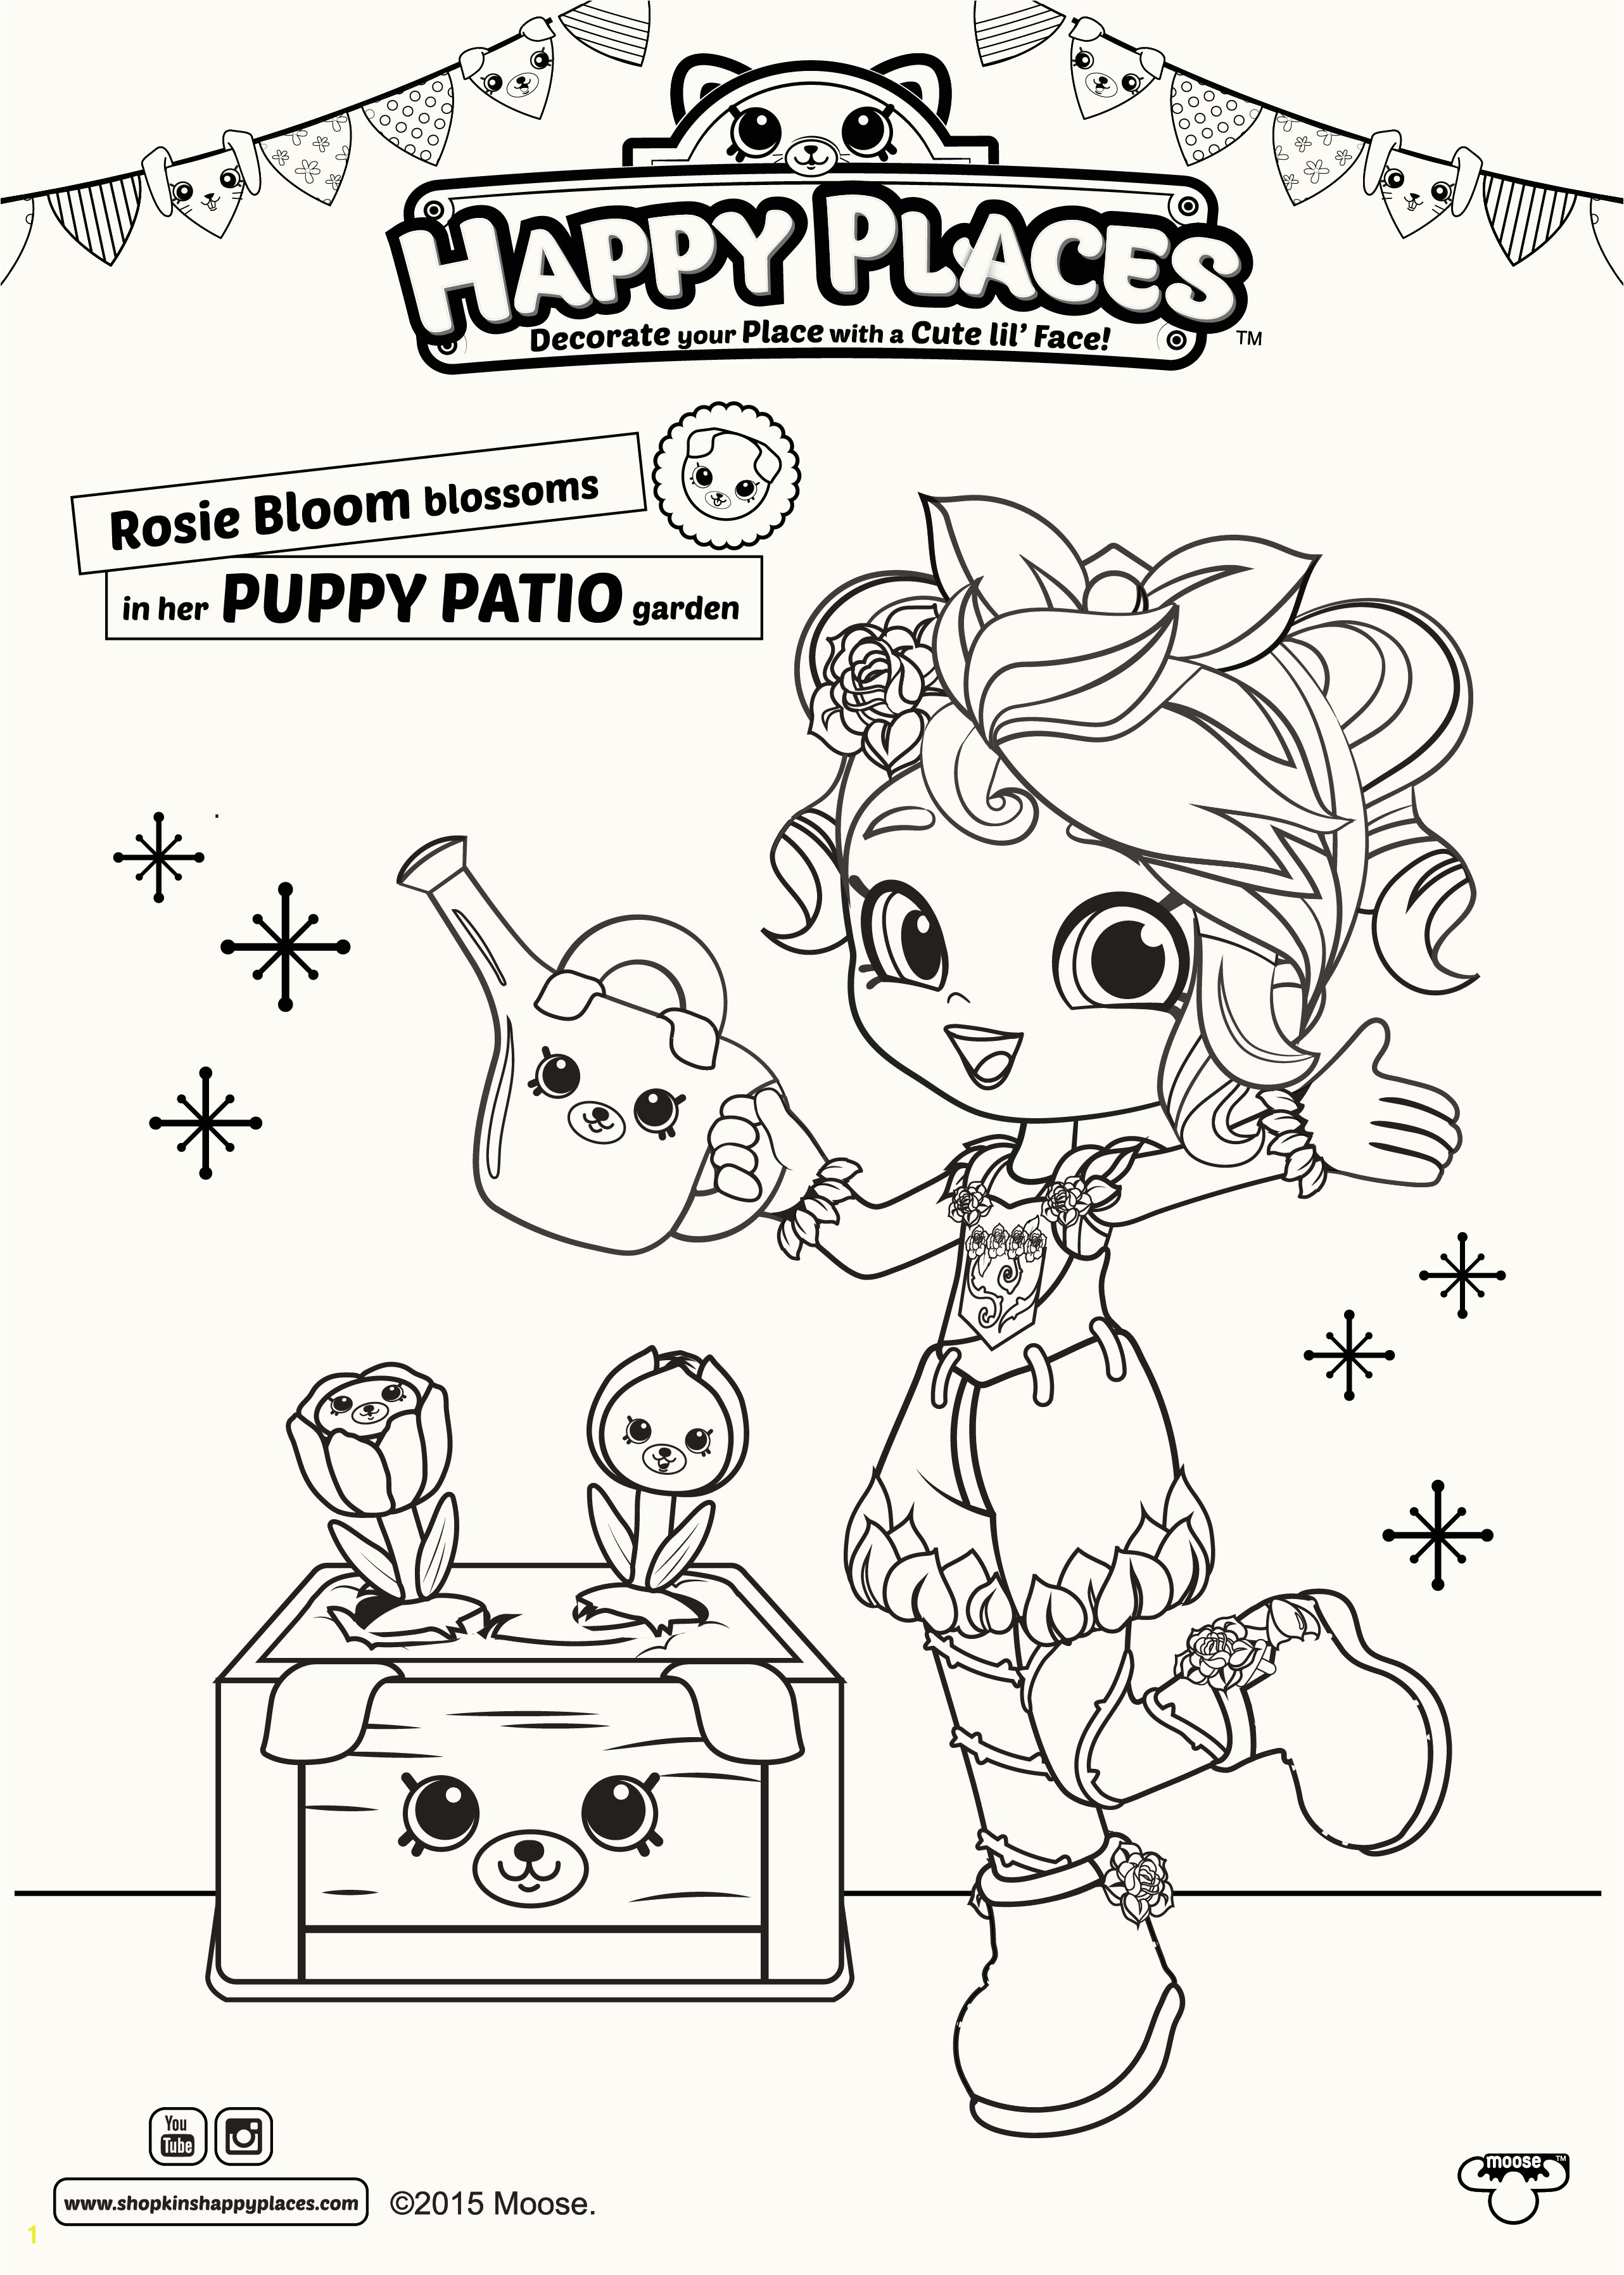 Cool Shopkins Happy Places Coloring Pages Unusual ficial Site